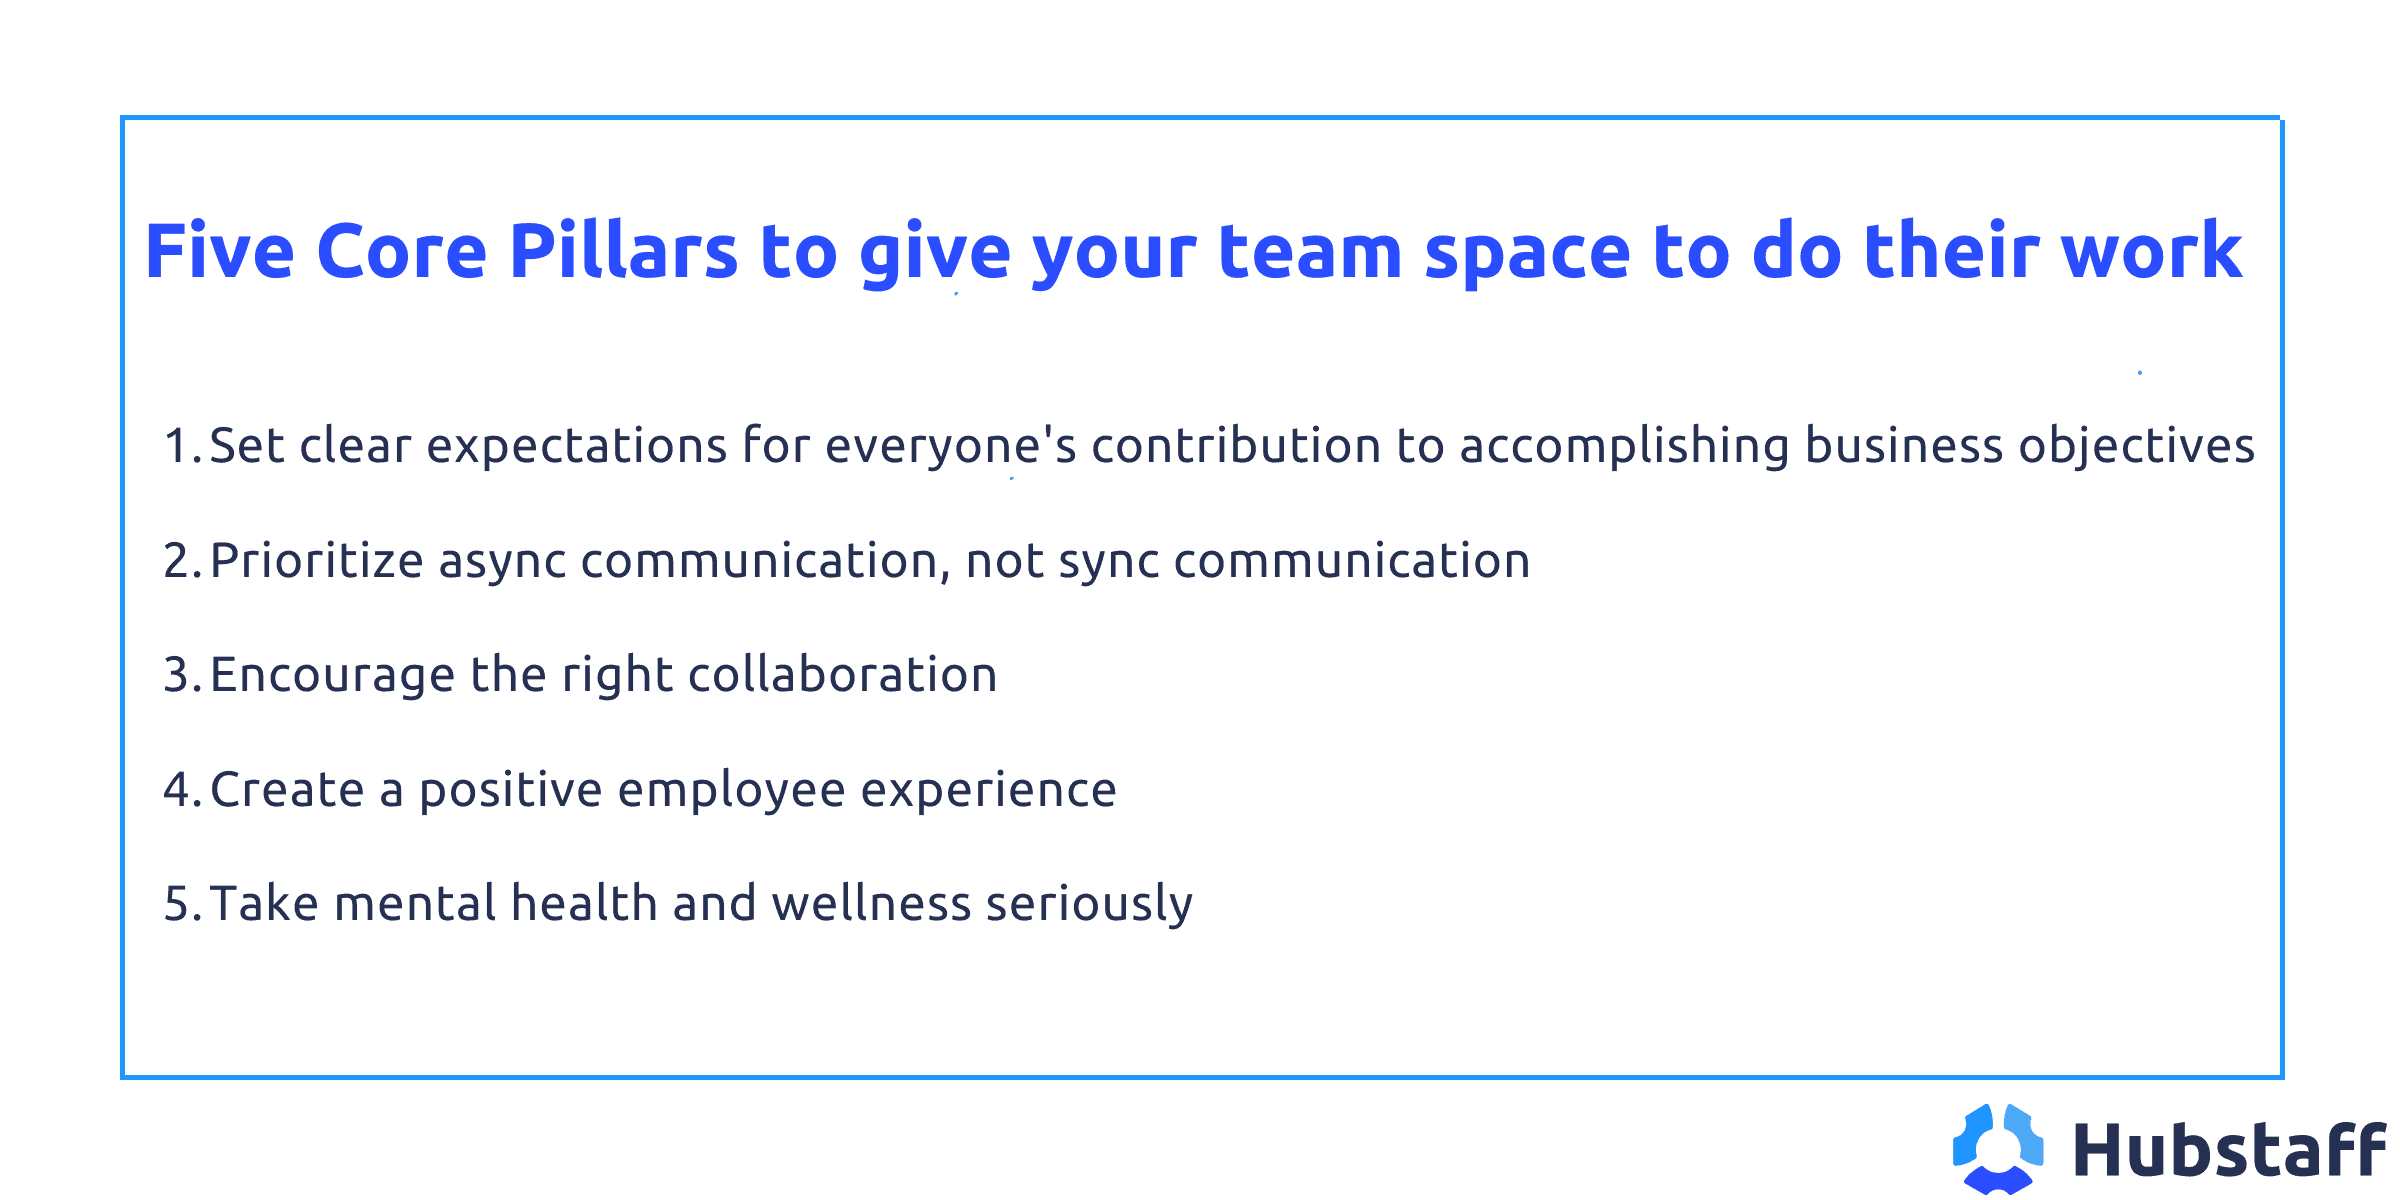 Five core pillars to give your team space to do their work

1. Set clear expectations for everyone's contribution to accomplishing business objectives

2. Prioritize async communication, not sync communication

3. Encourage the right collaboration

4. Create a positive employee experience 

5. Take mental health and wellness seriously